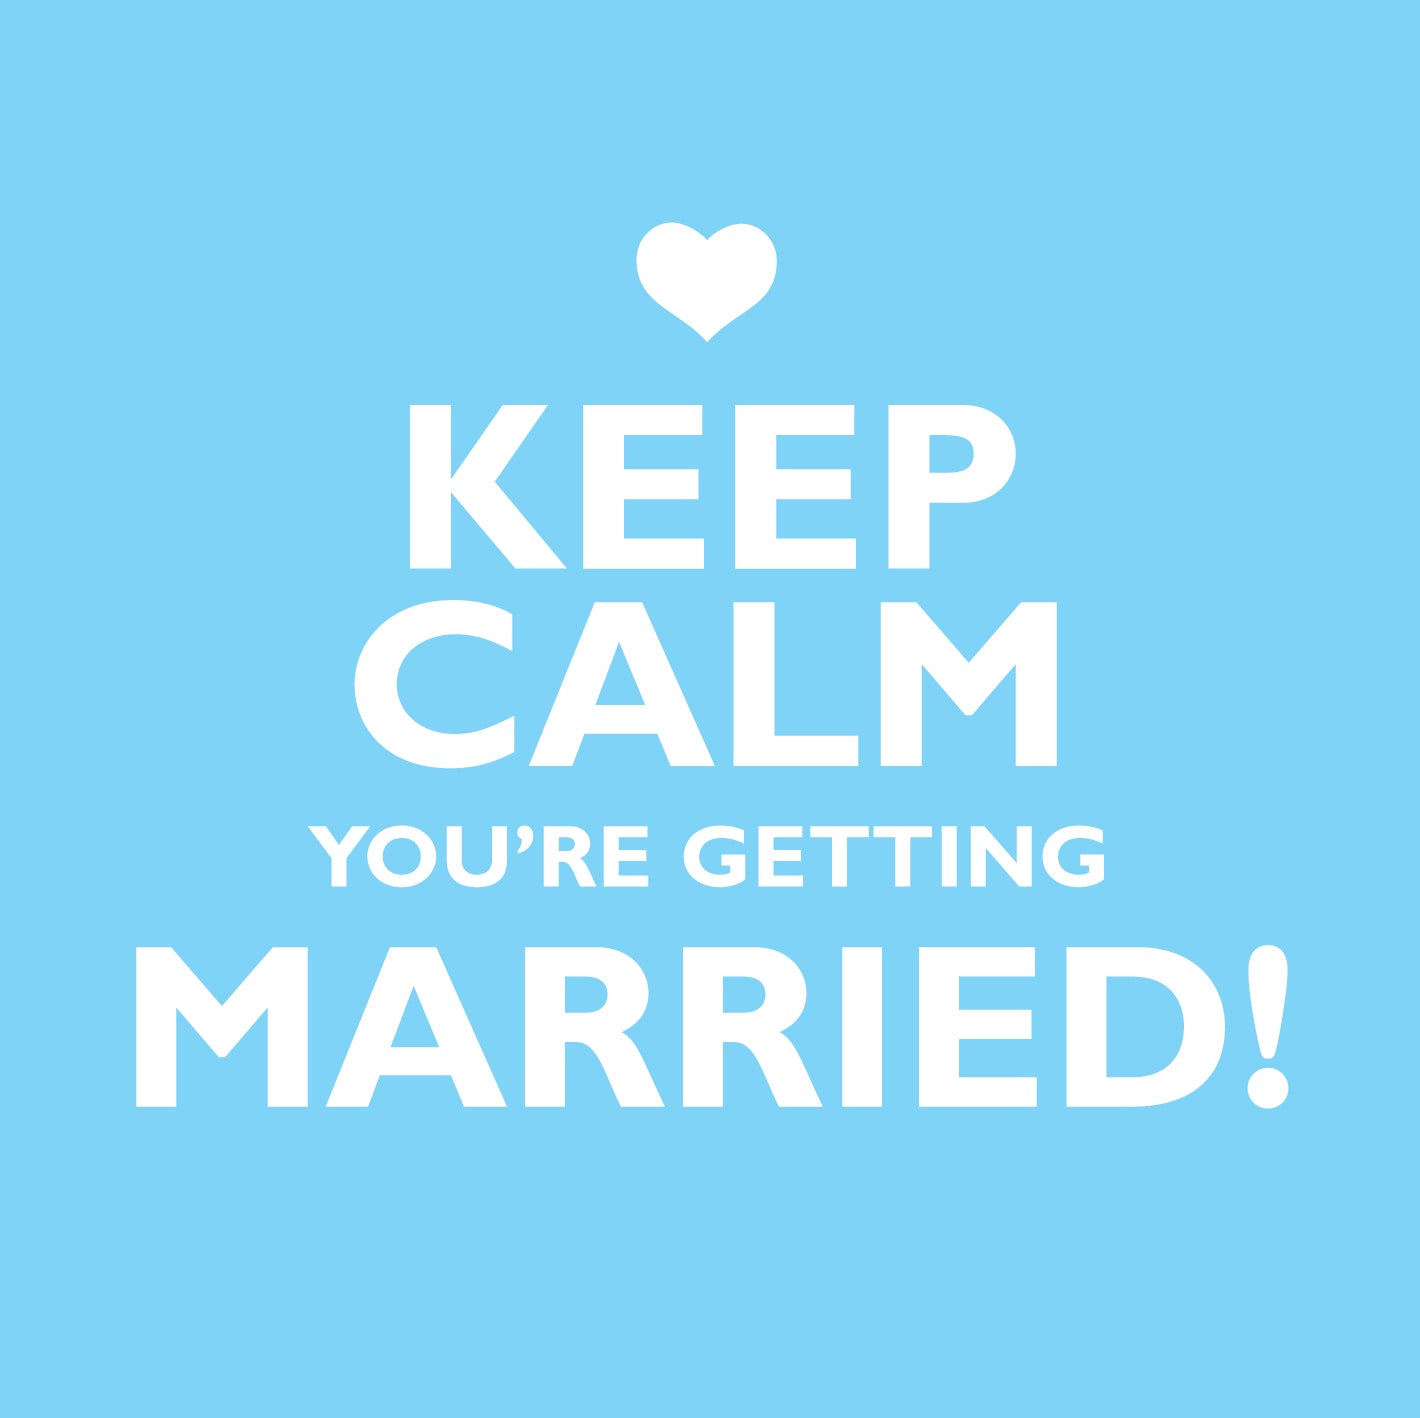 Keep Calm You'Re Getting MarriedKeep Calm You'Re Getting Married